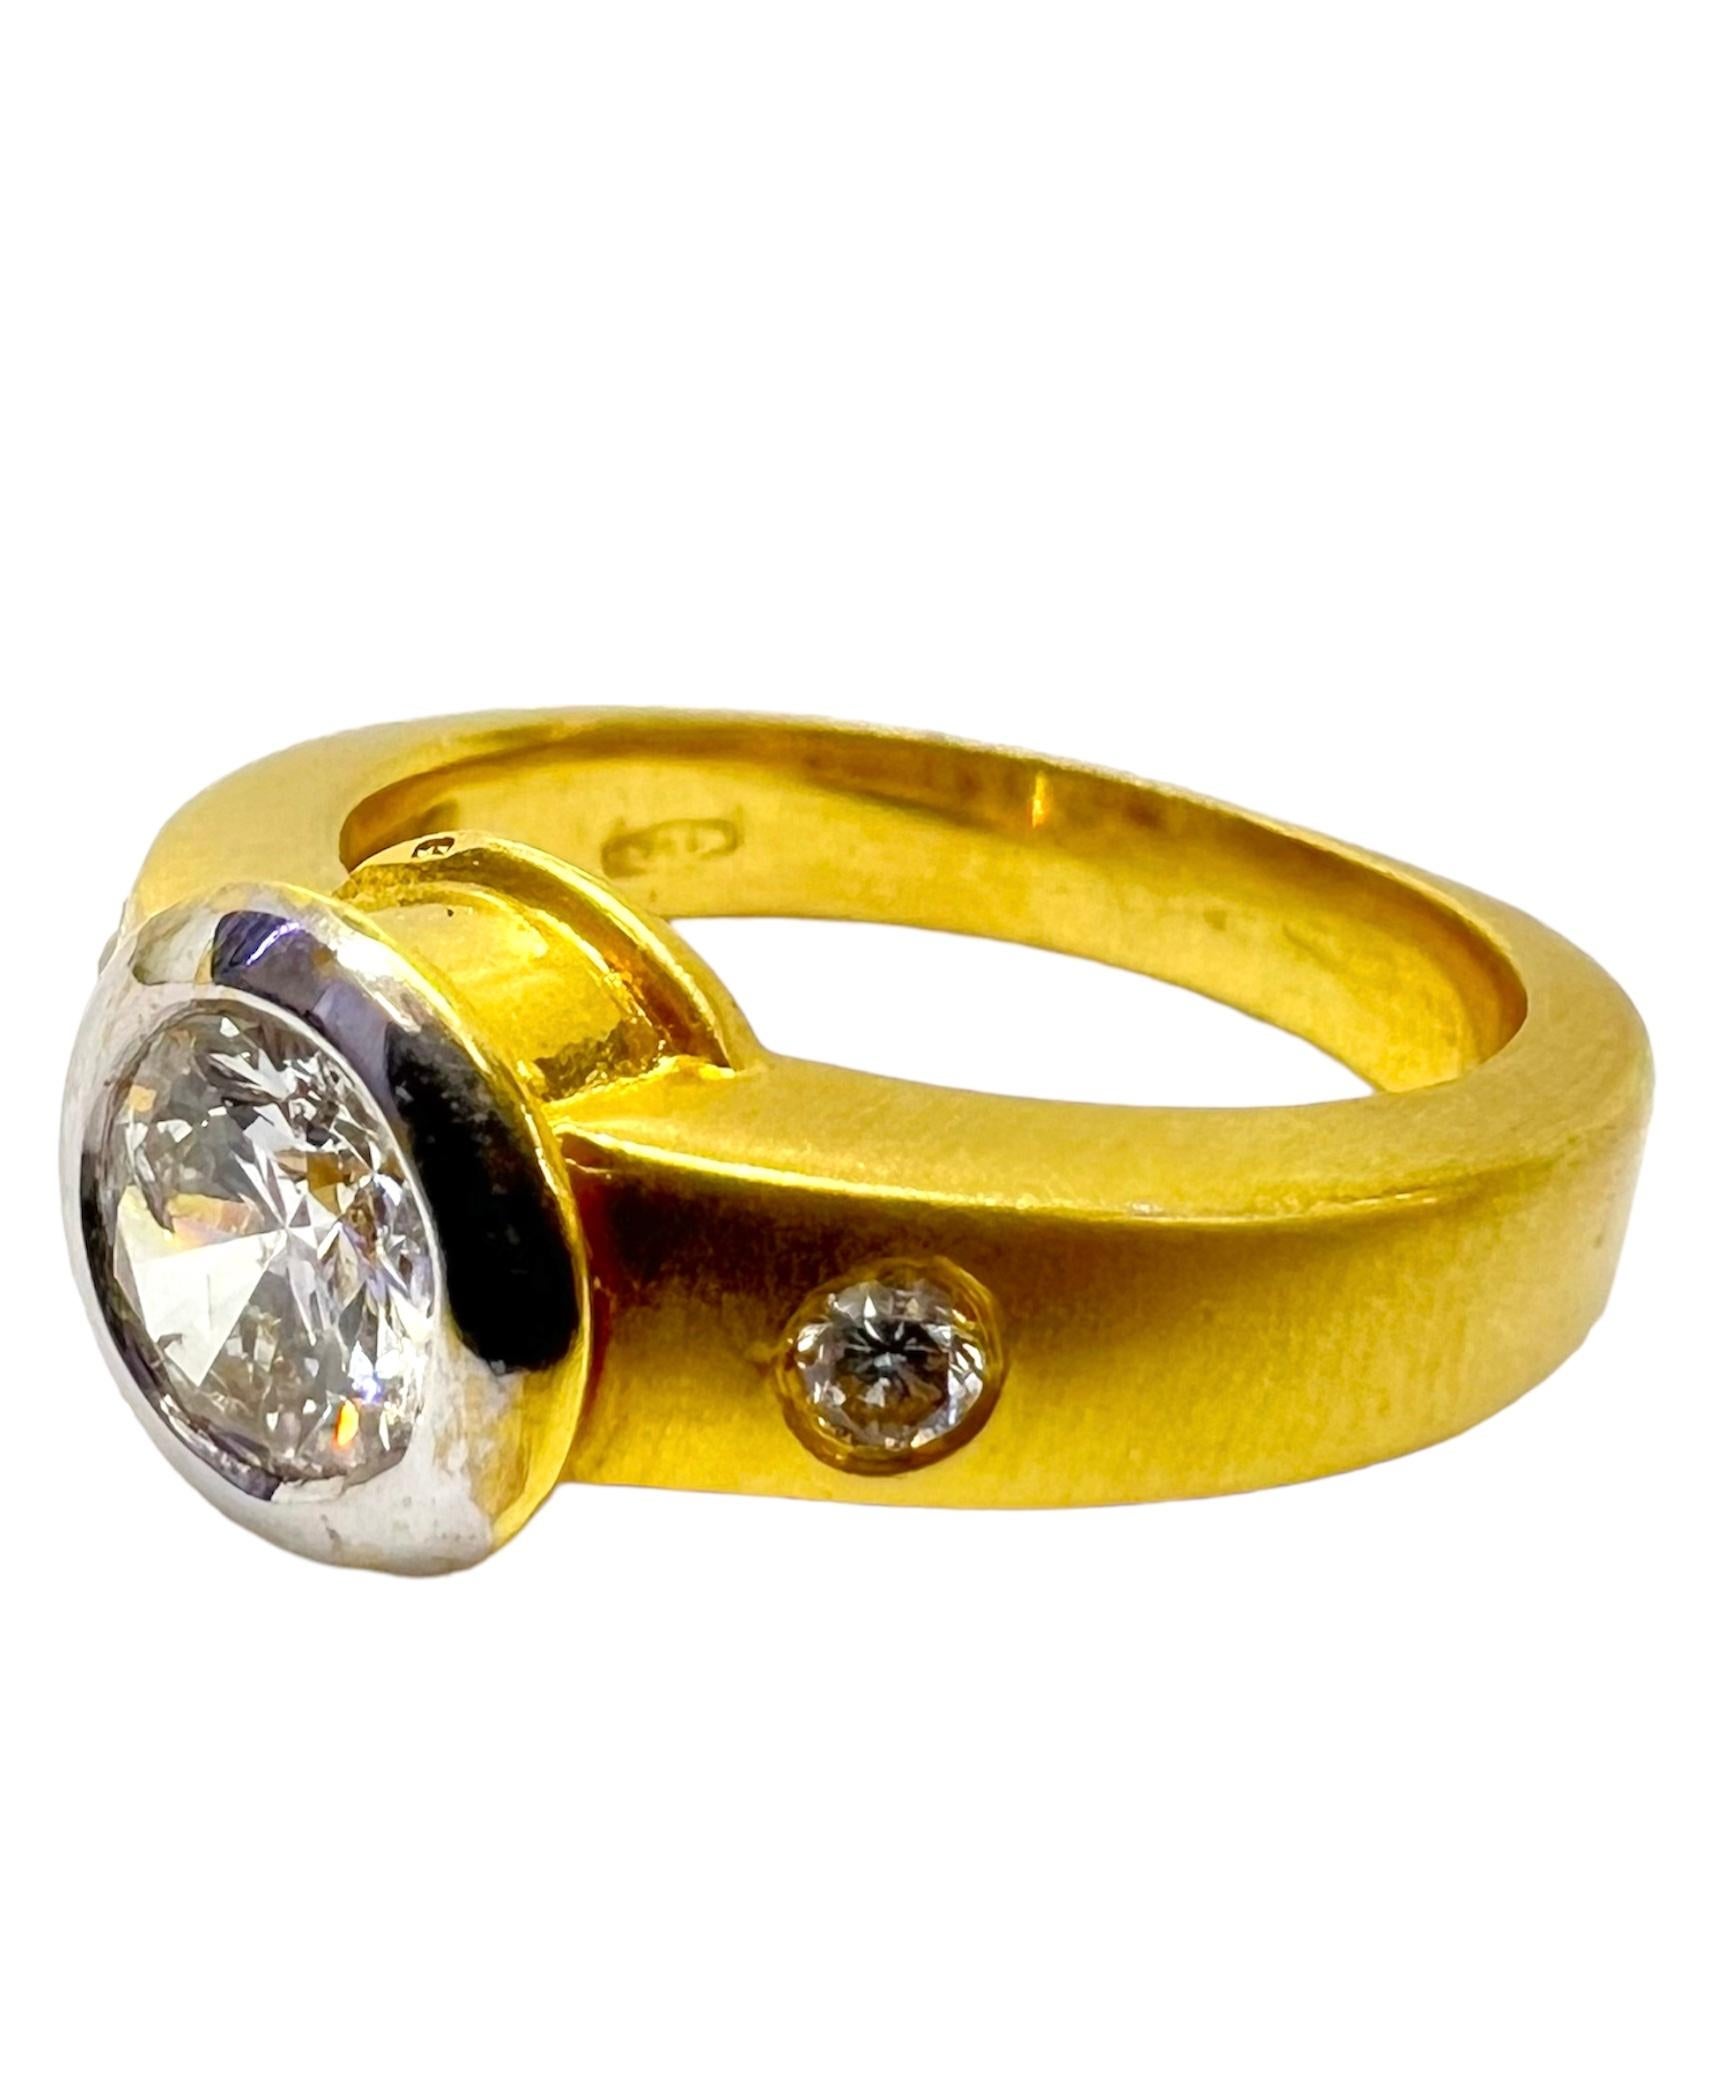 18K yellow gold ring with round diamonds.

Sophia D by Joseph Dardashti LTD has been known worldwide for 35 years and are inspired by classic Art Deco design that merges with modern manufacturing techniques.